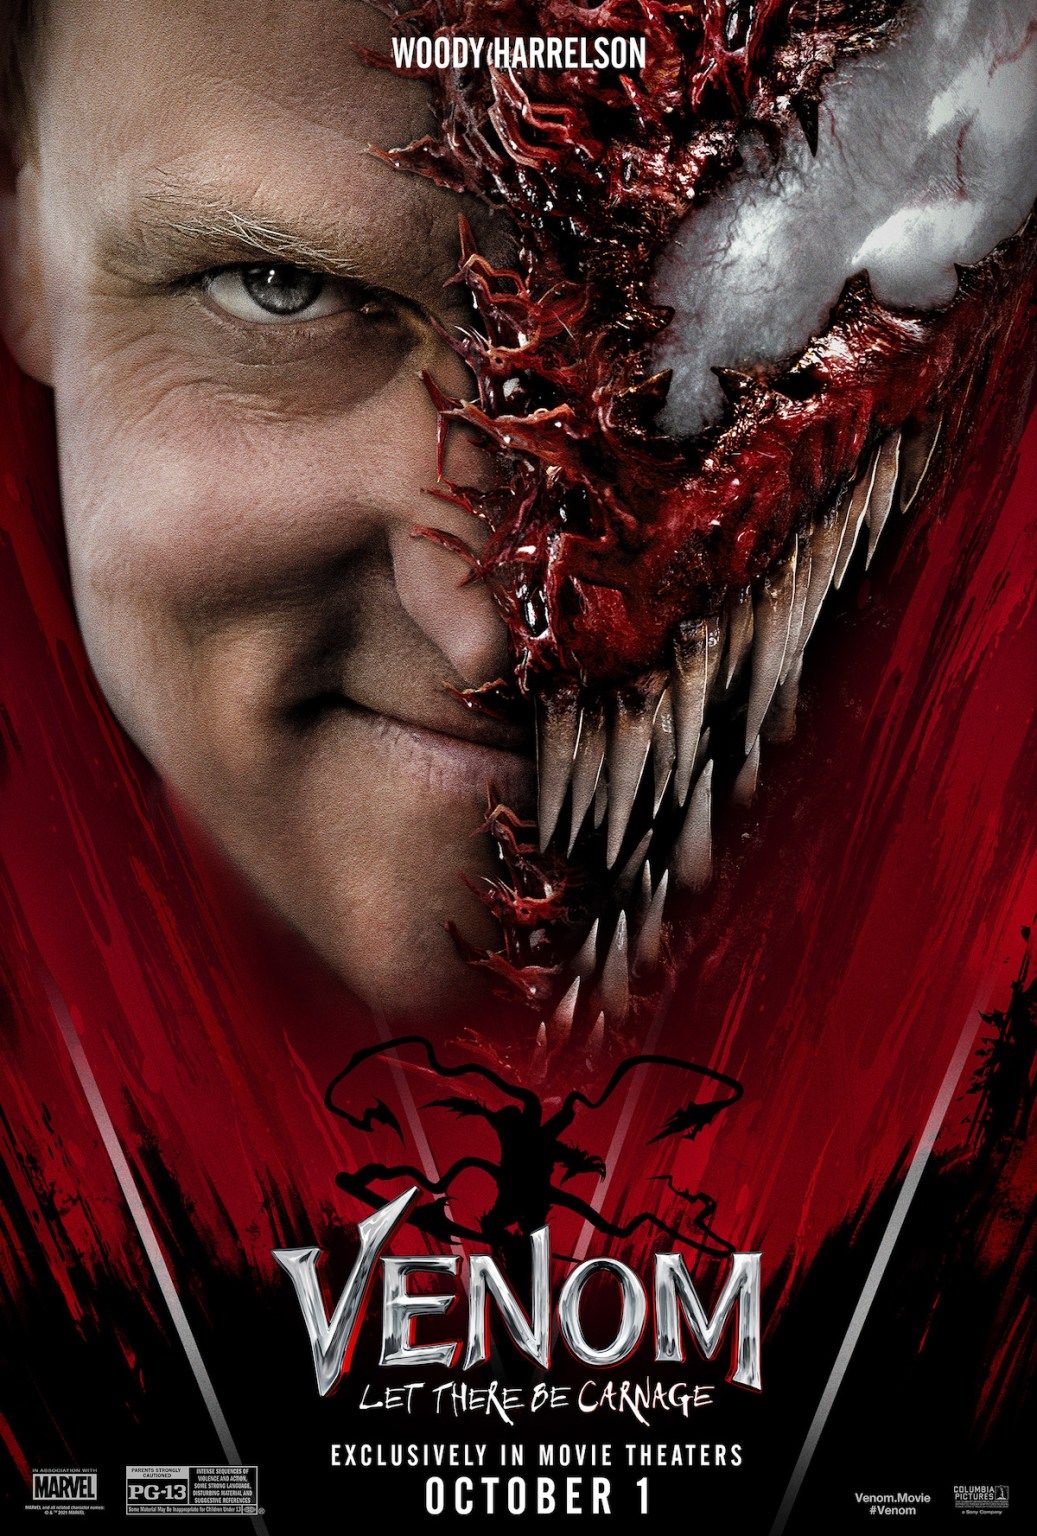 Woody Harrelson As Carnage In Venom 2 Character Poster